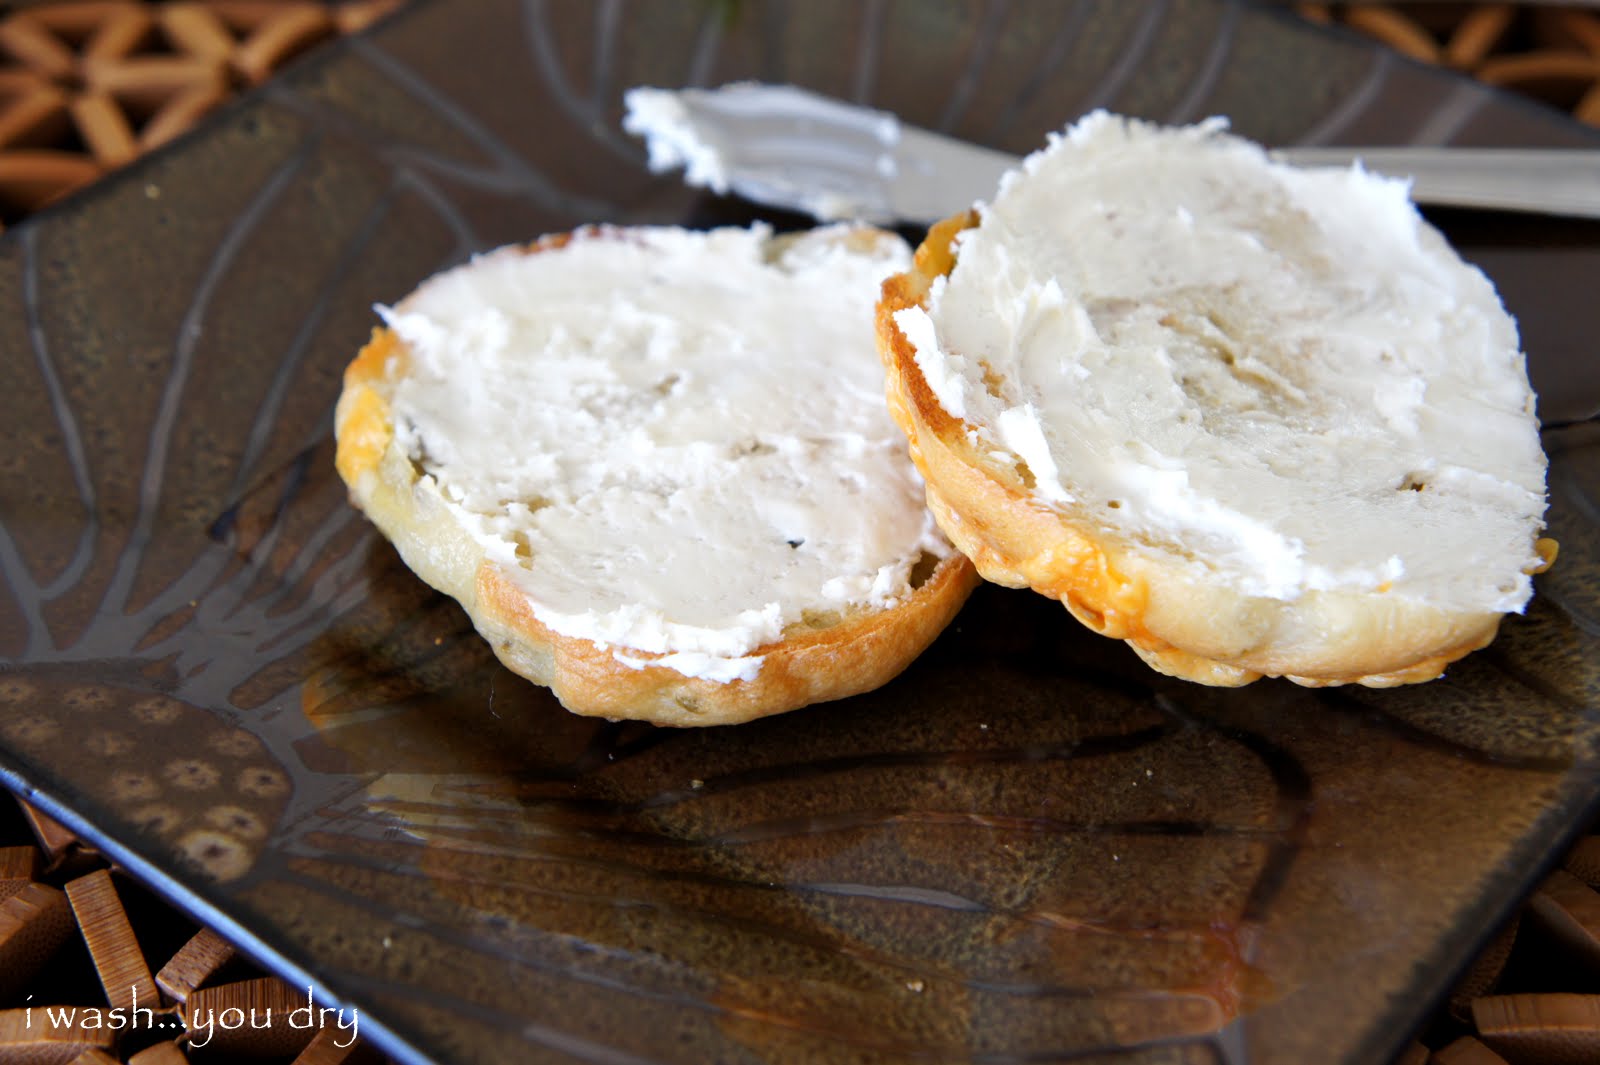 A bagel sliced in half with cream cheese spread on it, displayed on a plate